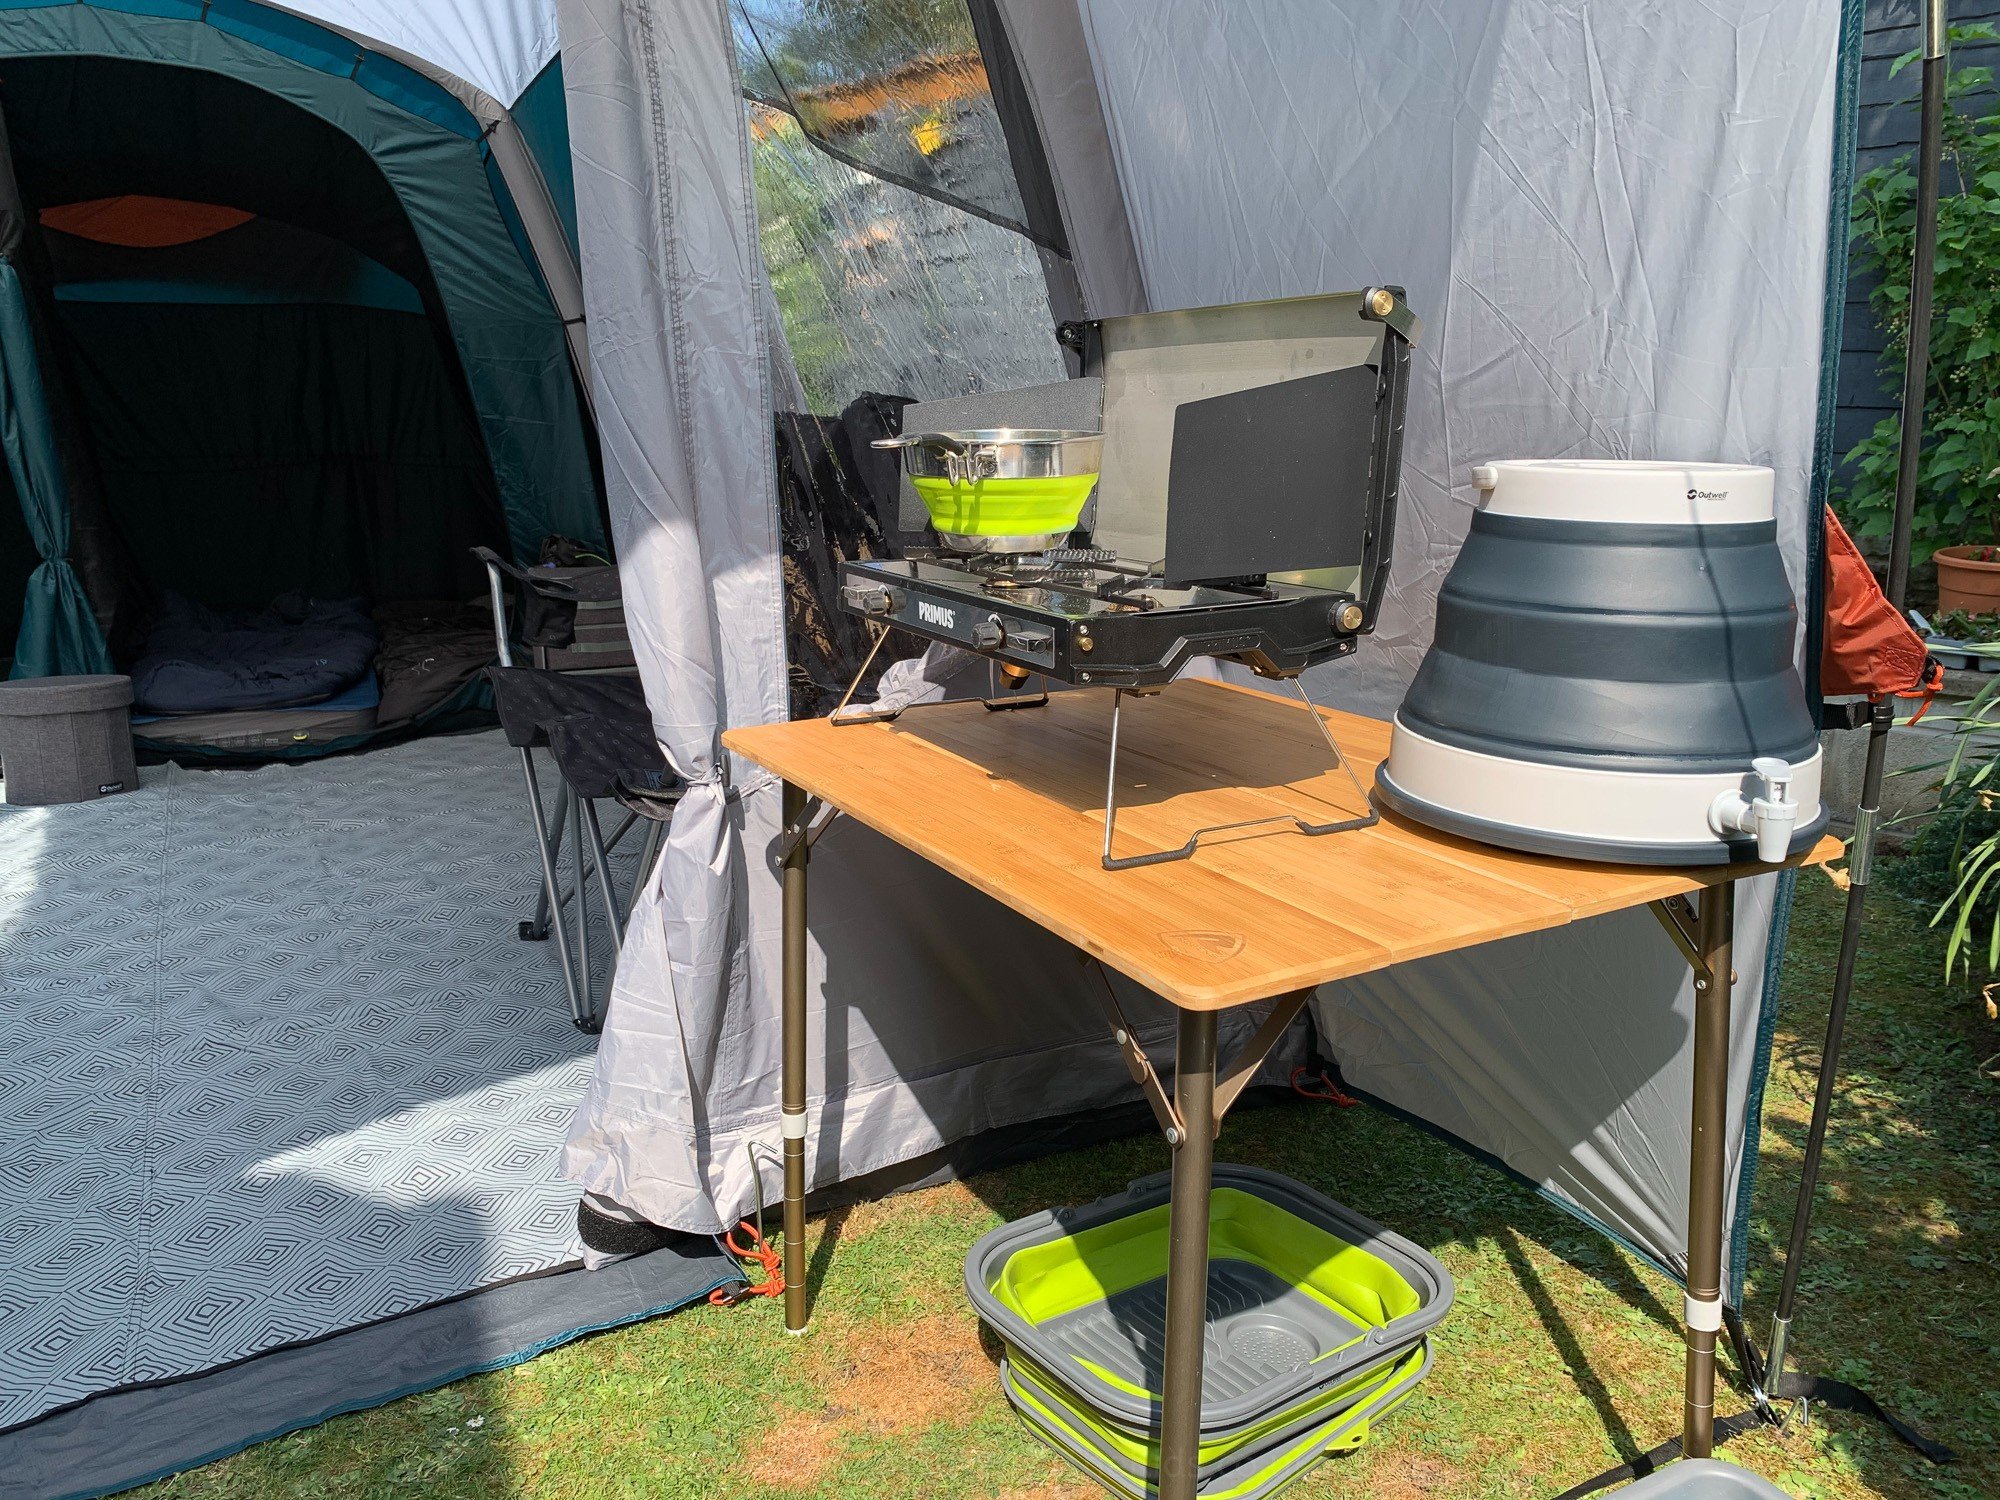 The porch with table and camping stove